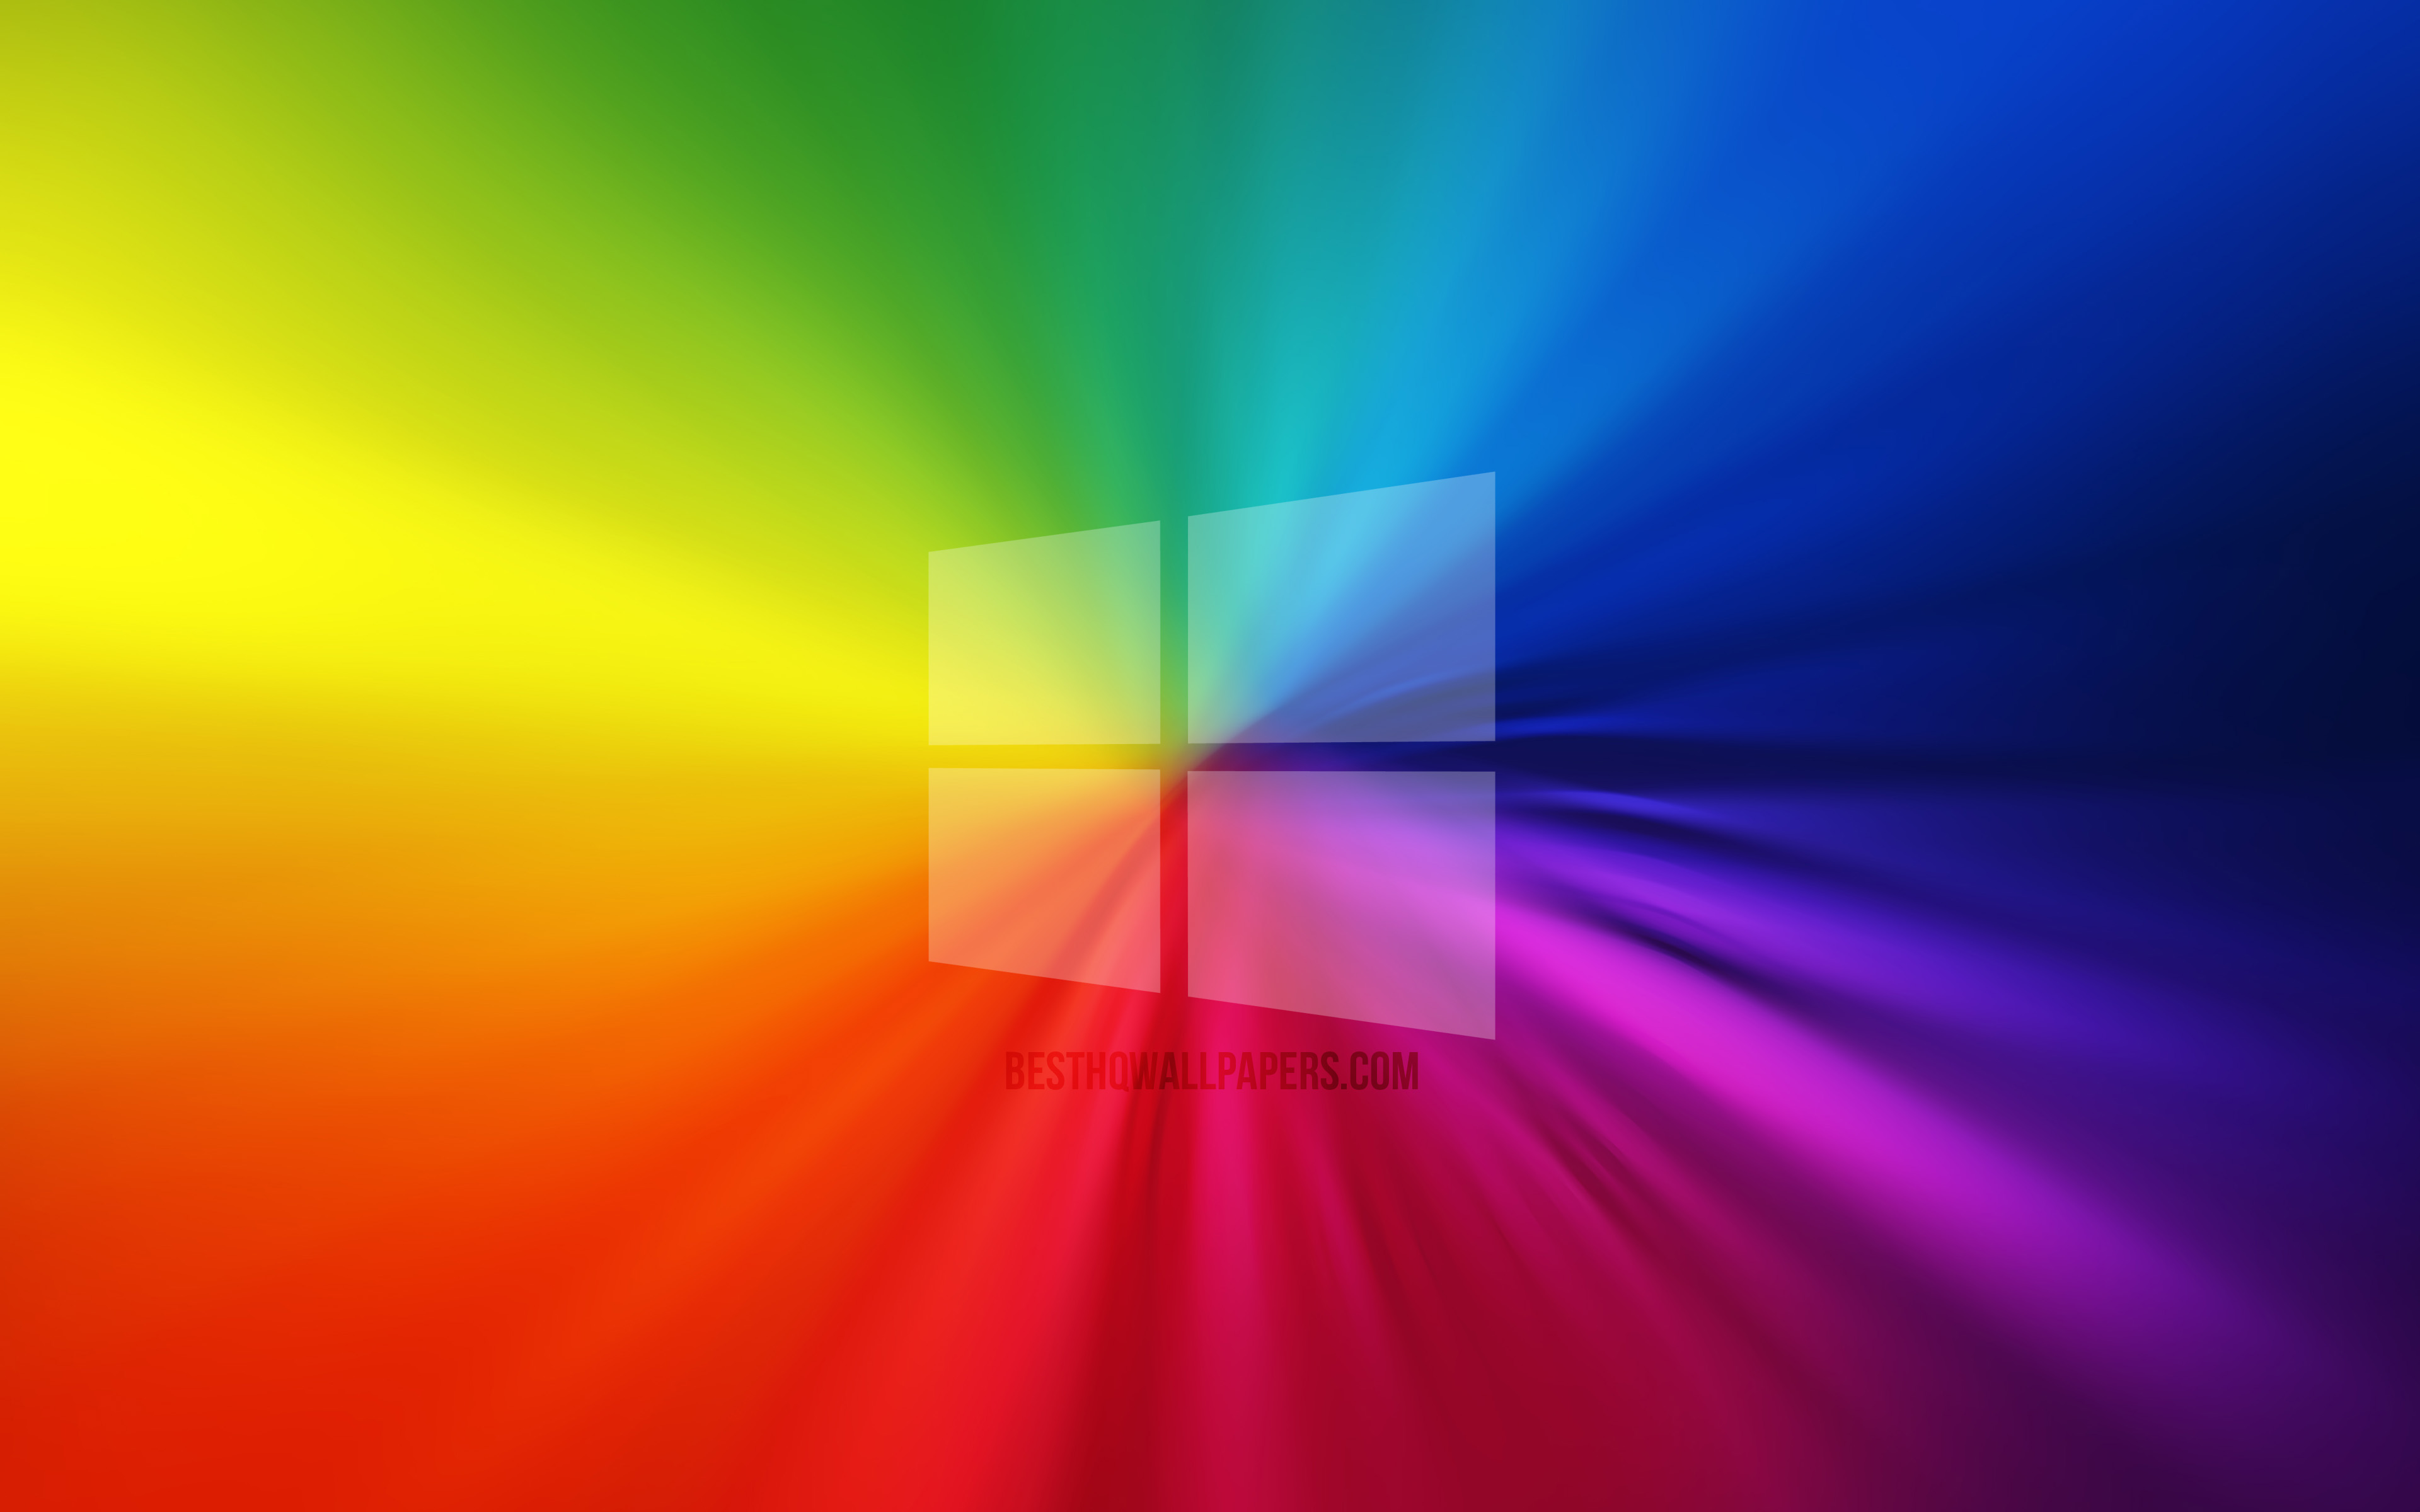 Download wallpaper Windows 10 logo, vortex, rainbow background, creative, operating systems, Microsoft Windows artwork, Windows 10 for desktop with resolution 3840x2400. High Quality HD picture wallpaper